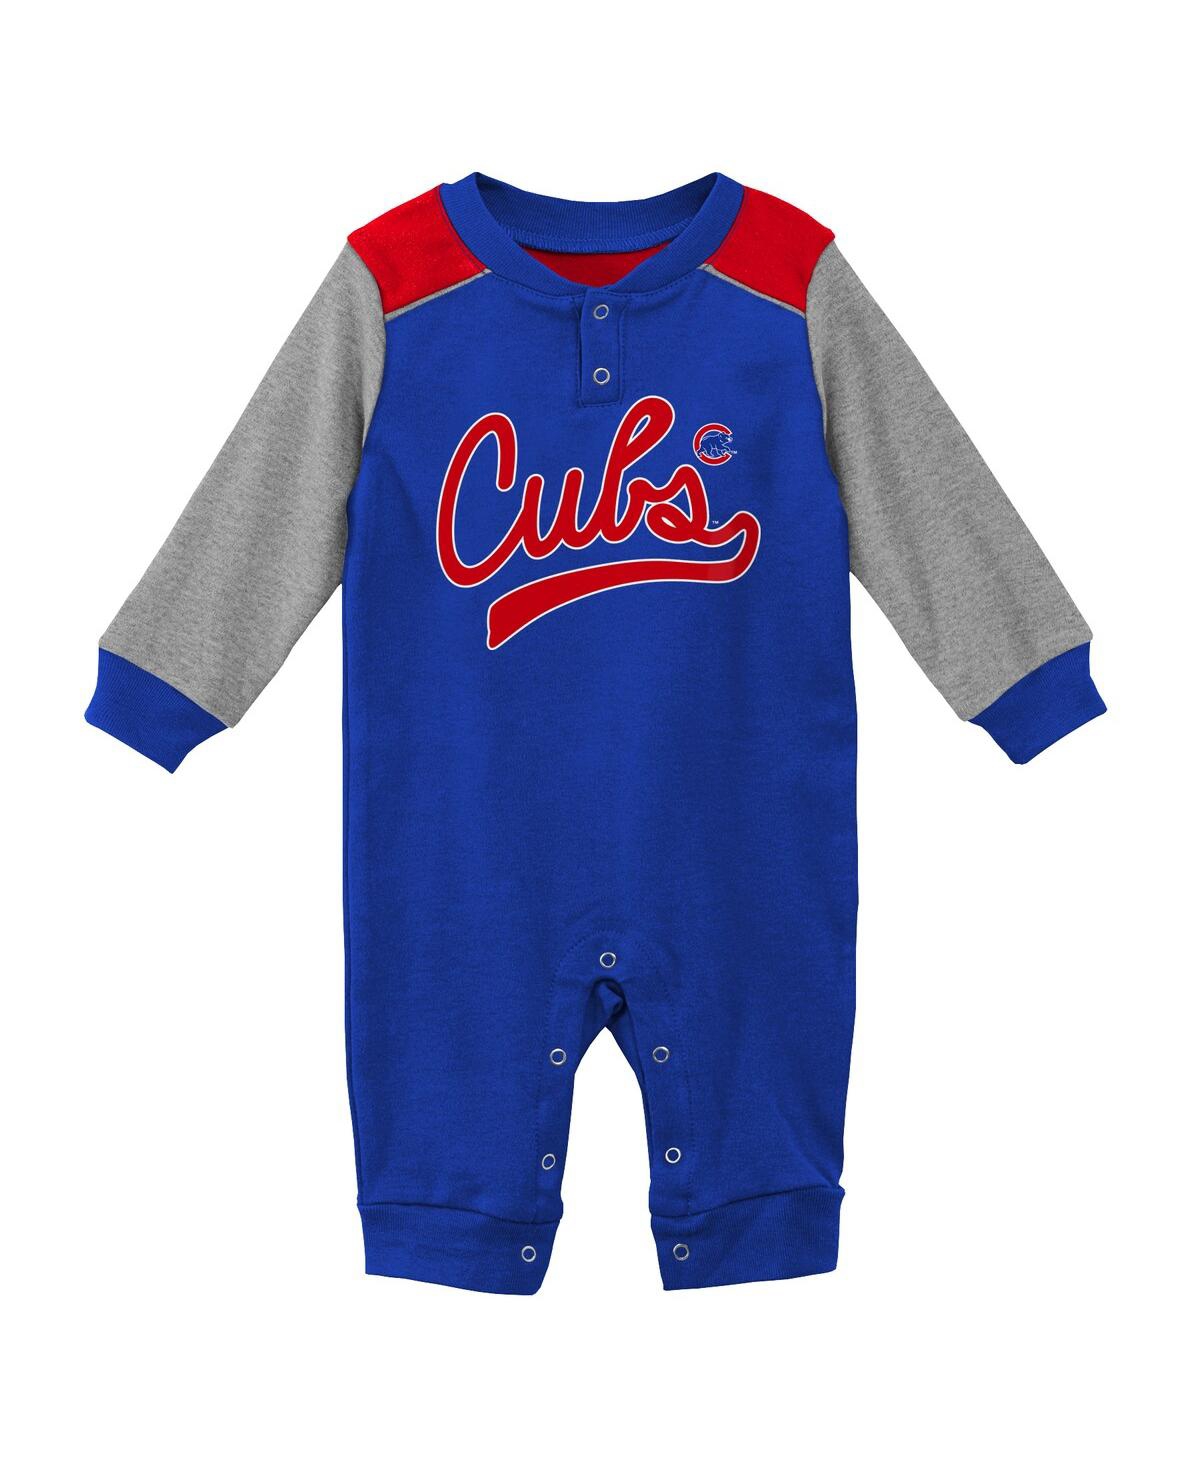 Shop Outerstuff Newborn And Infant Boys And Girls Royal, Heathered Gray Chicago Cubs Scrimmage Long Sleeve Jumper In Royal,heathered Gray